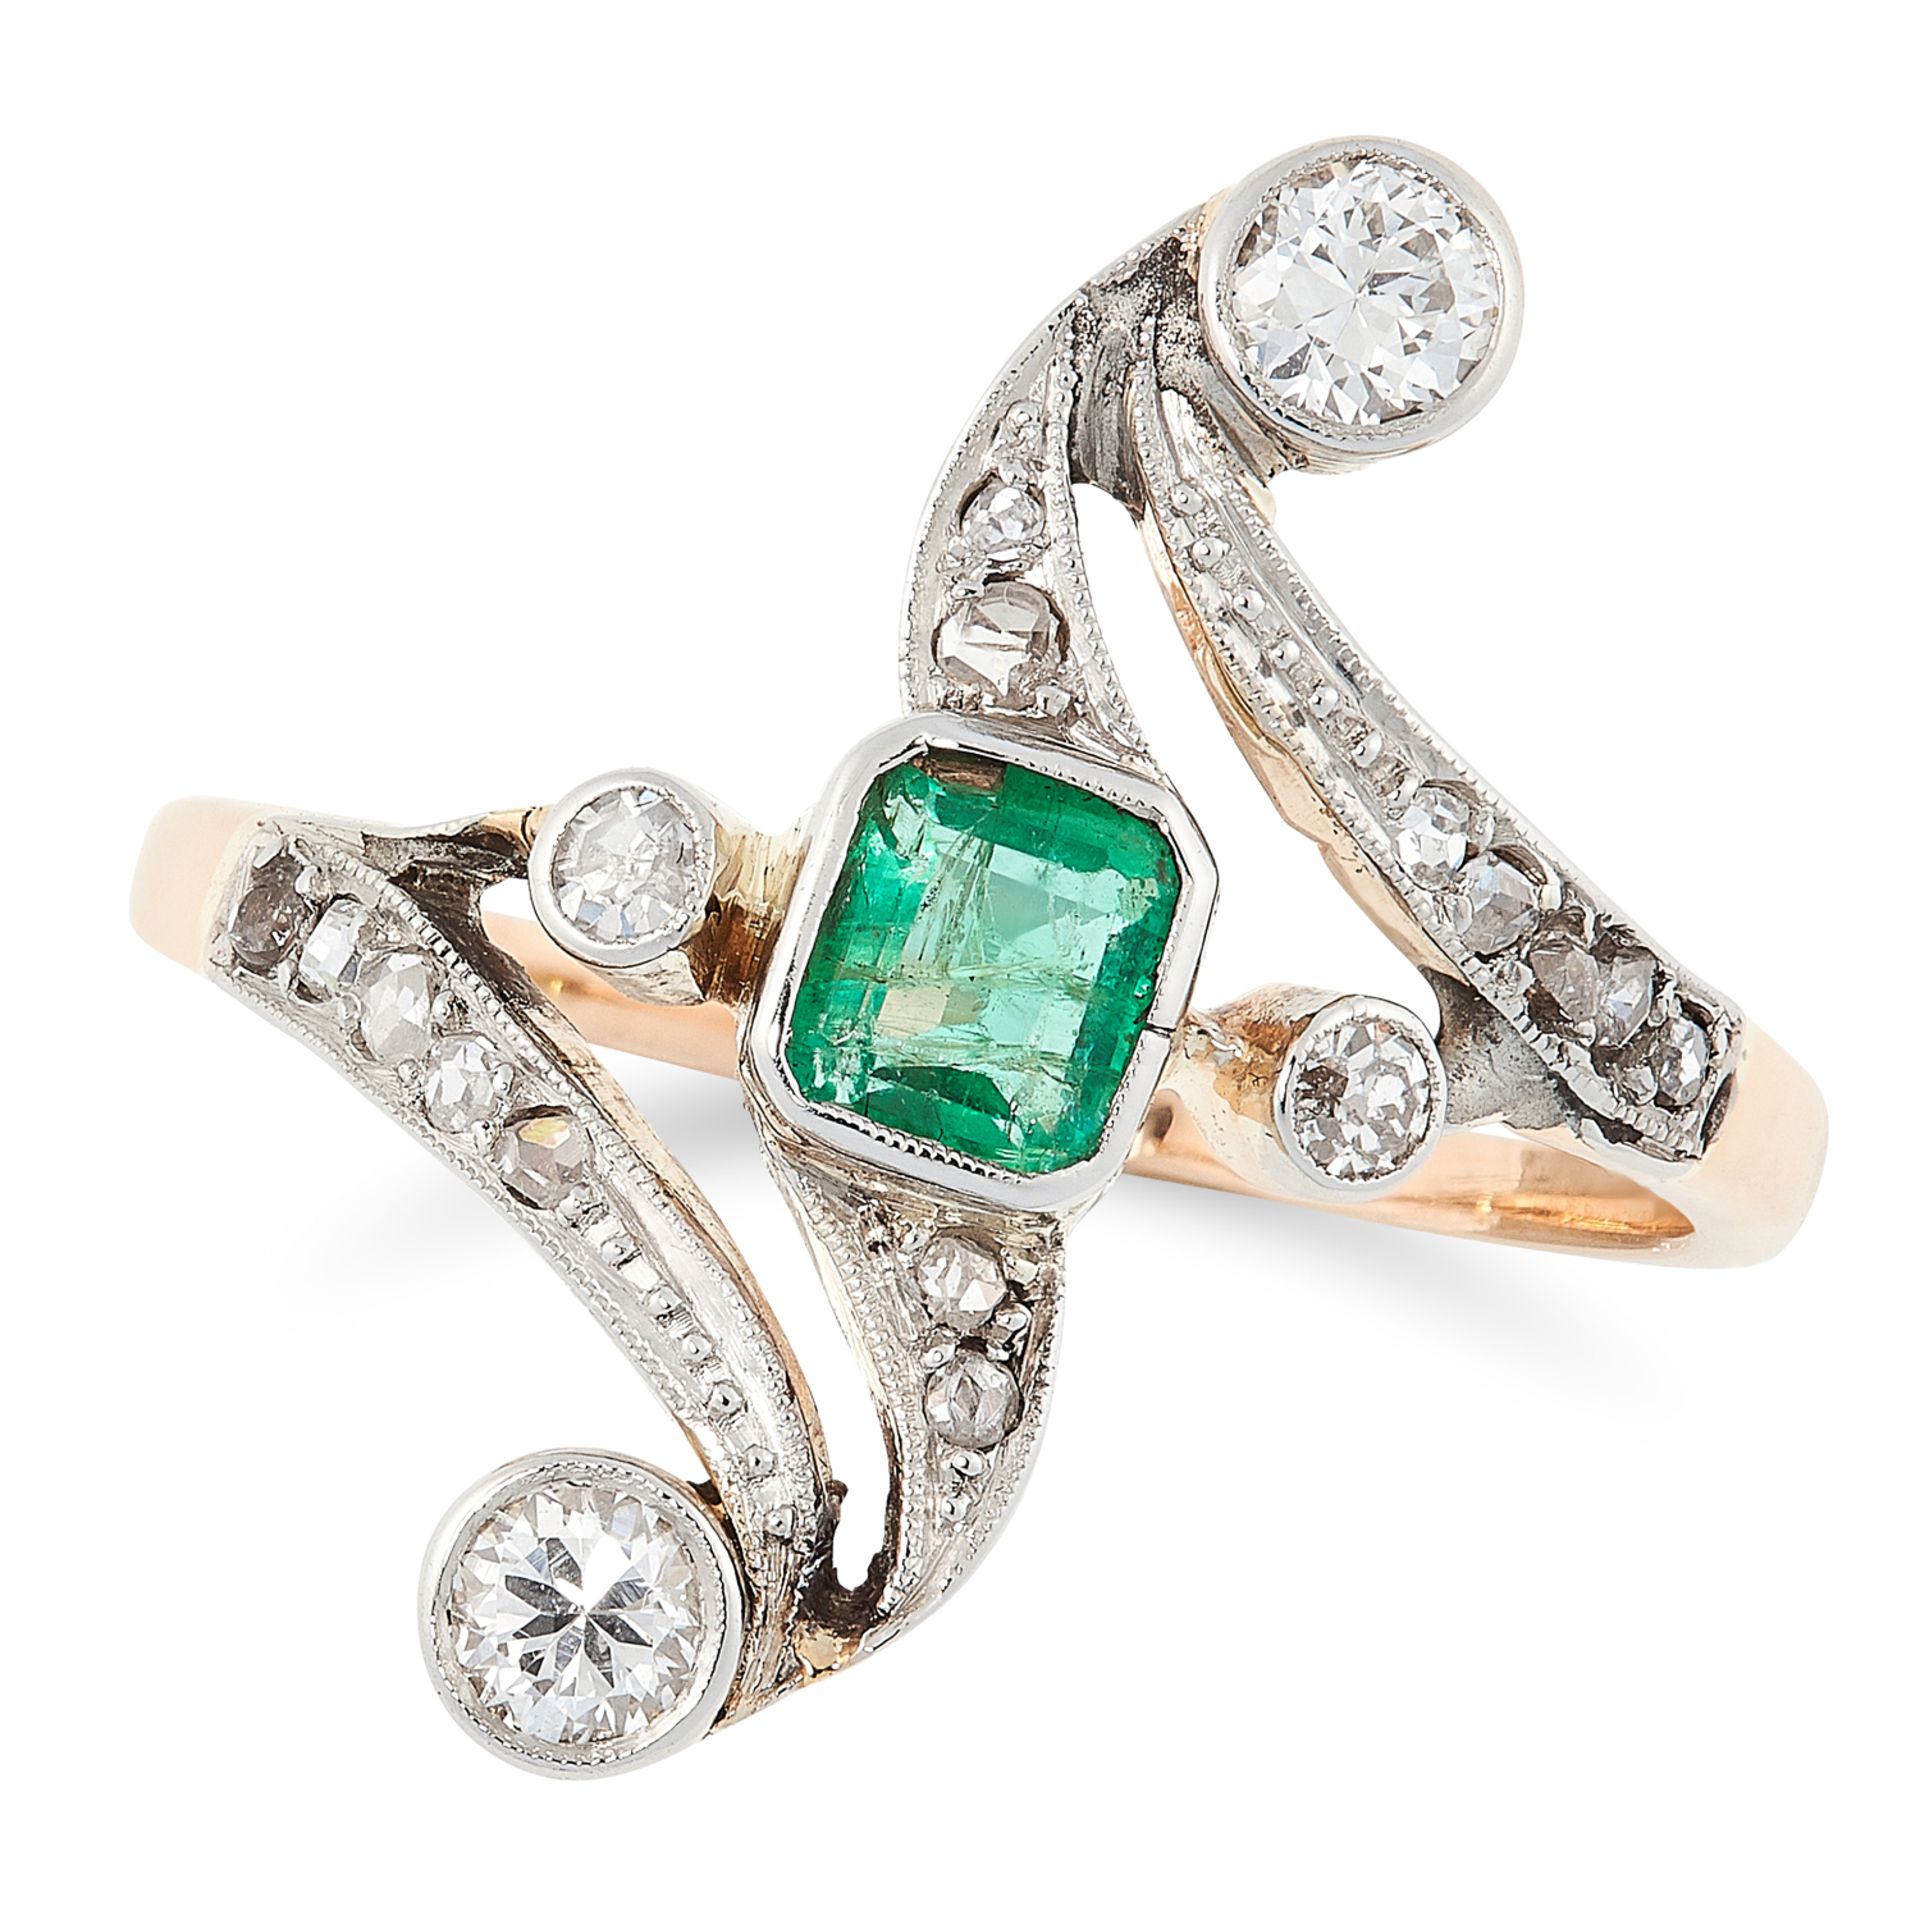 AN EMERALD AND DIAMOND RING in 14ct yellow gold, in open scrolling framework set with an emerald cut